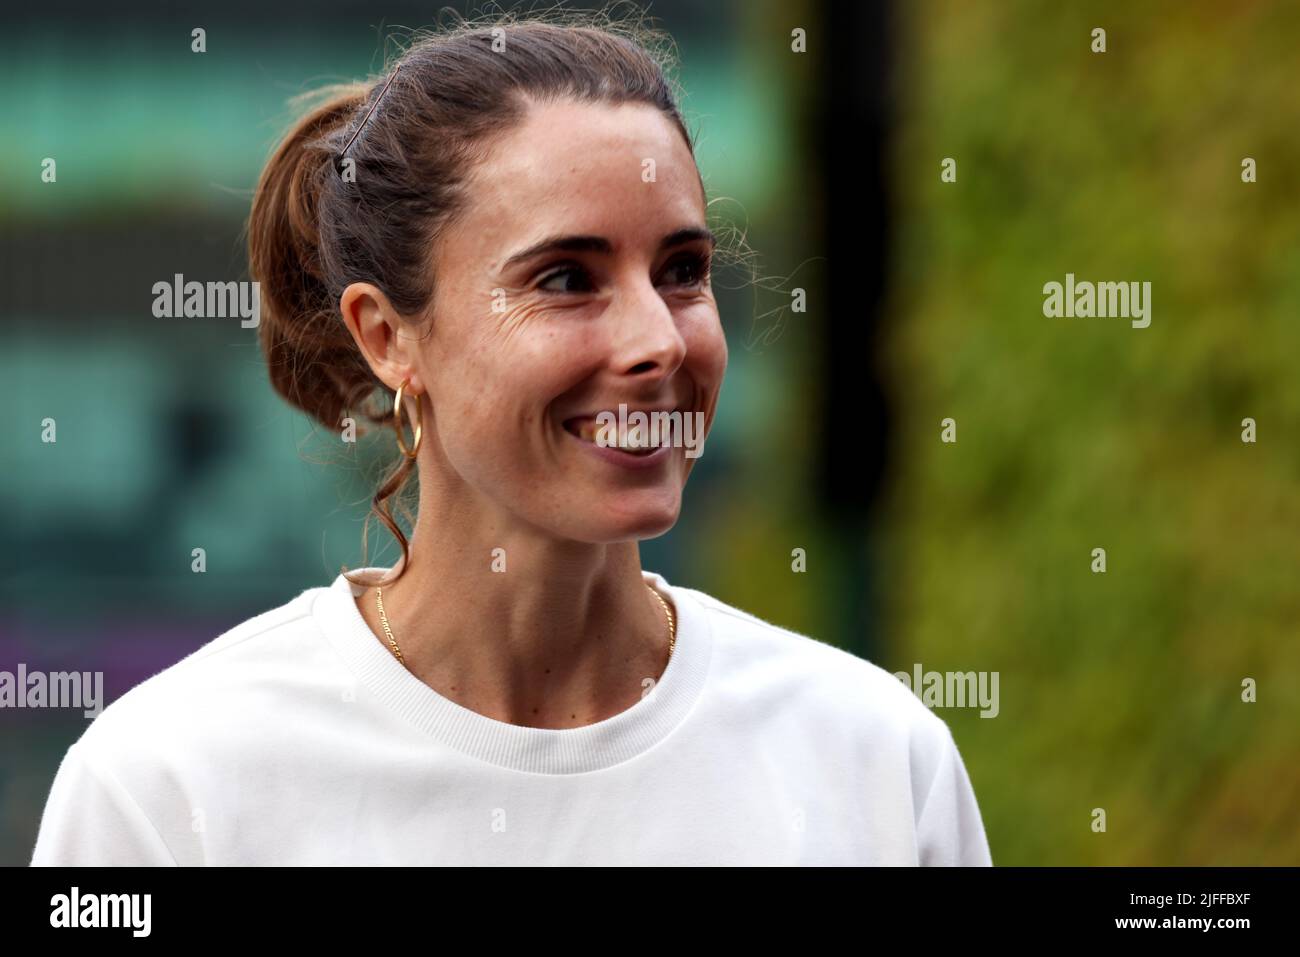 London. Aliz Cornet of, France. 2nd July, 2022. conducting an interview shortly after defeating number one seed Iga Swiatek in the third round at Wimbledon today. Credit: Adam Stoltman/Alamy Live News Stock Photo